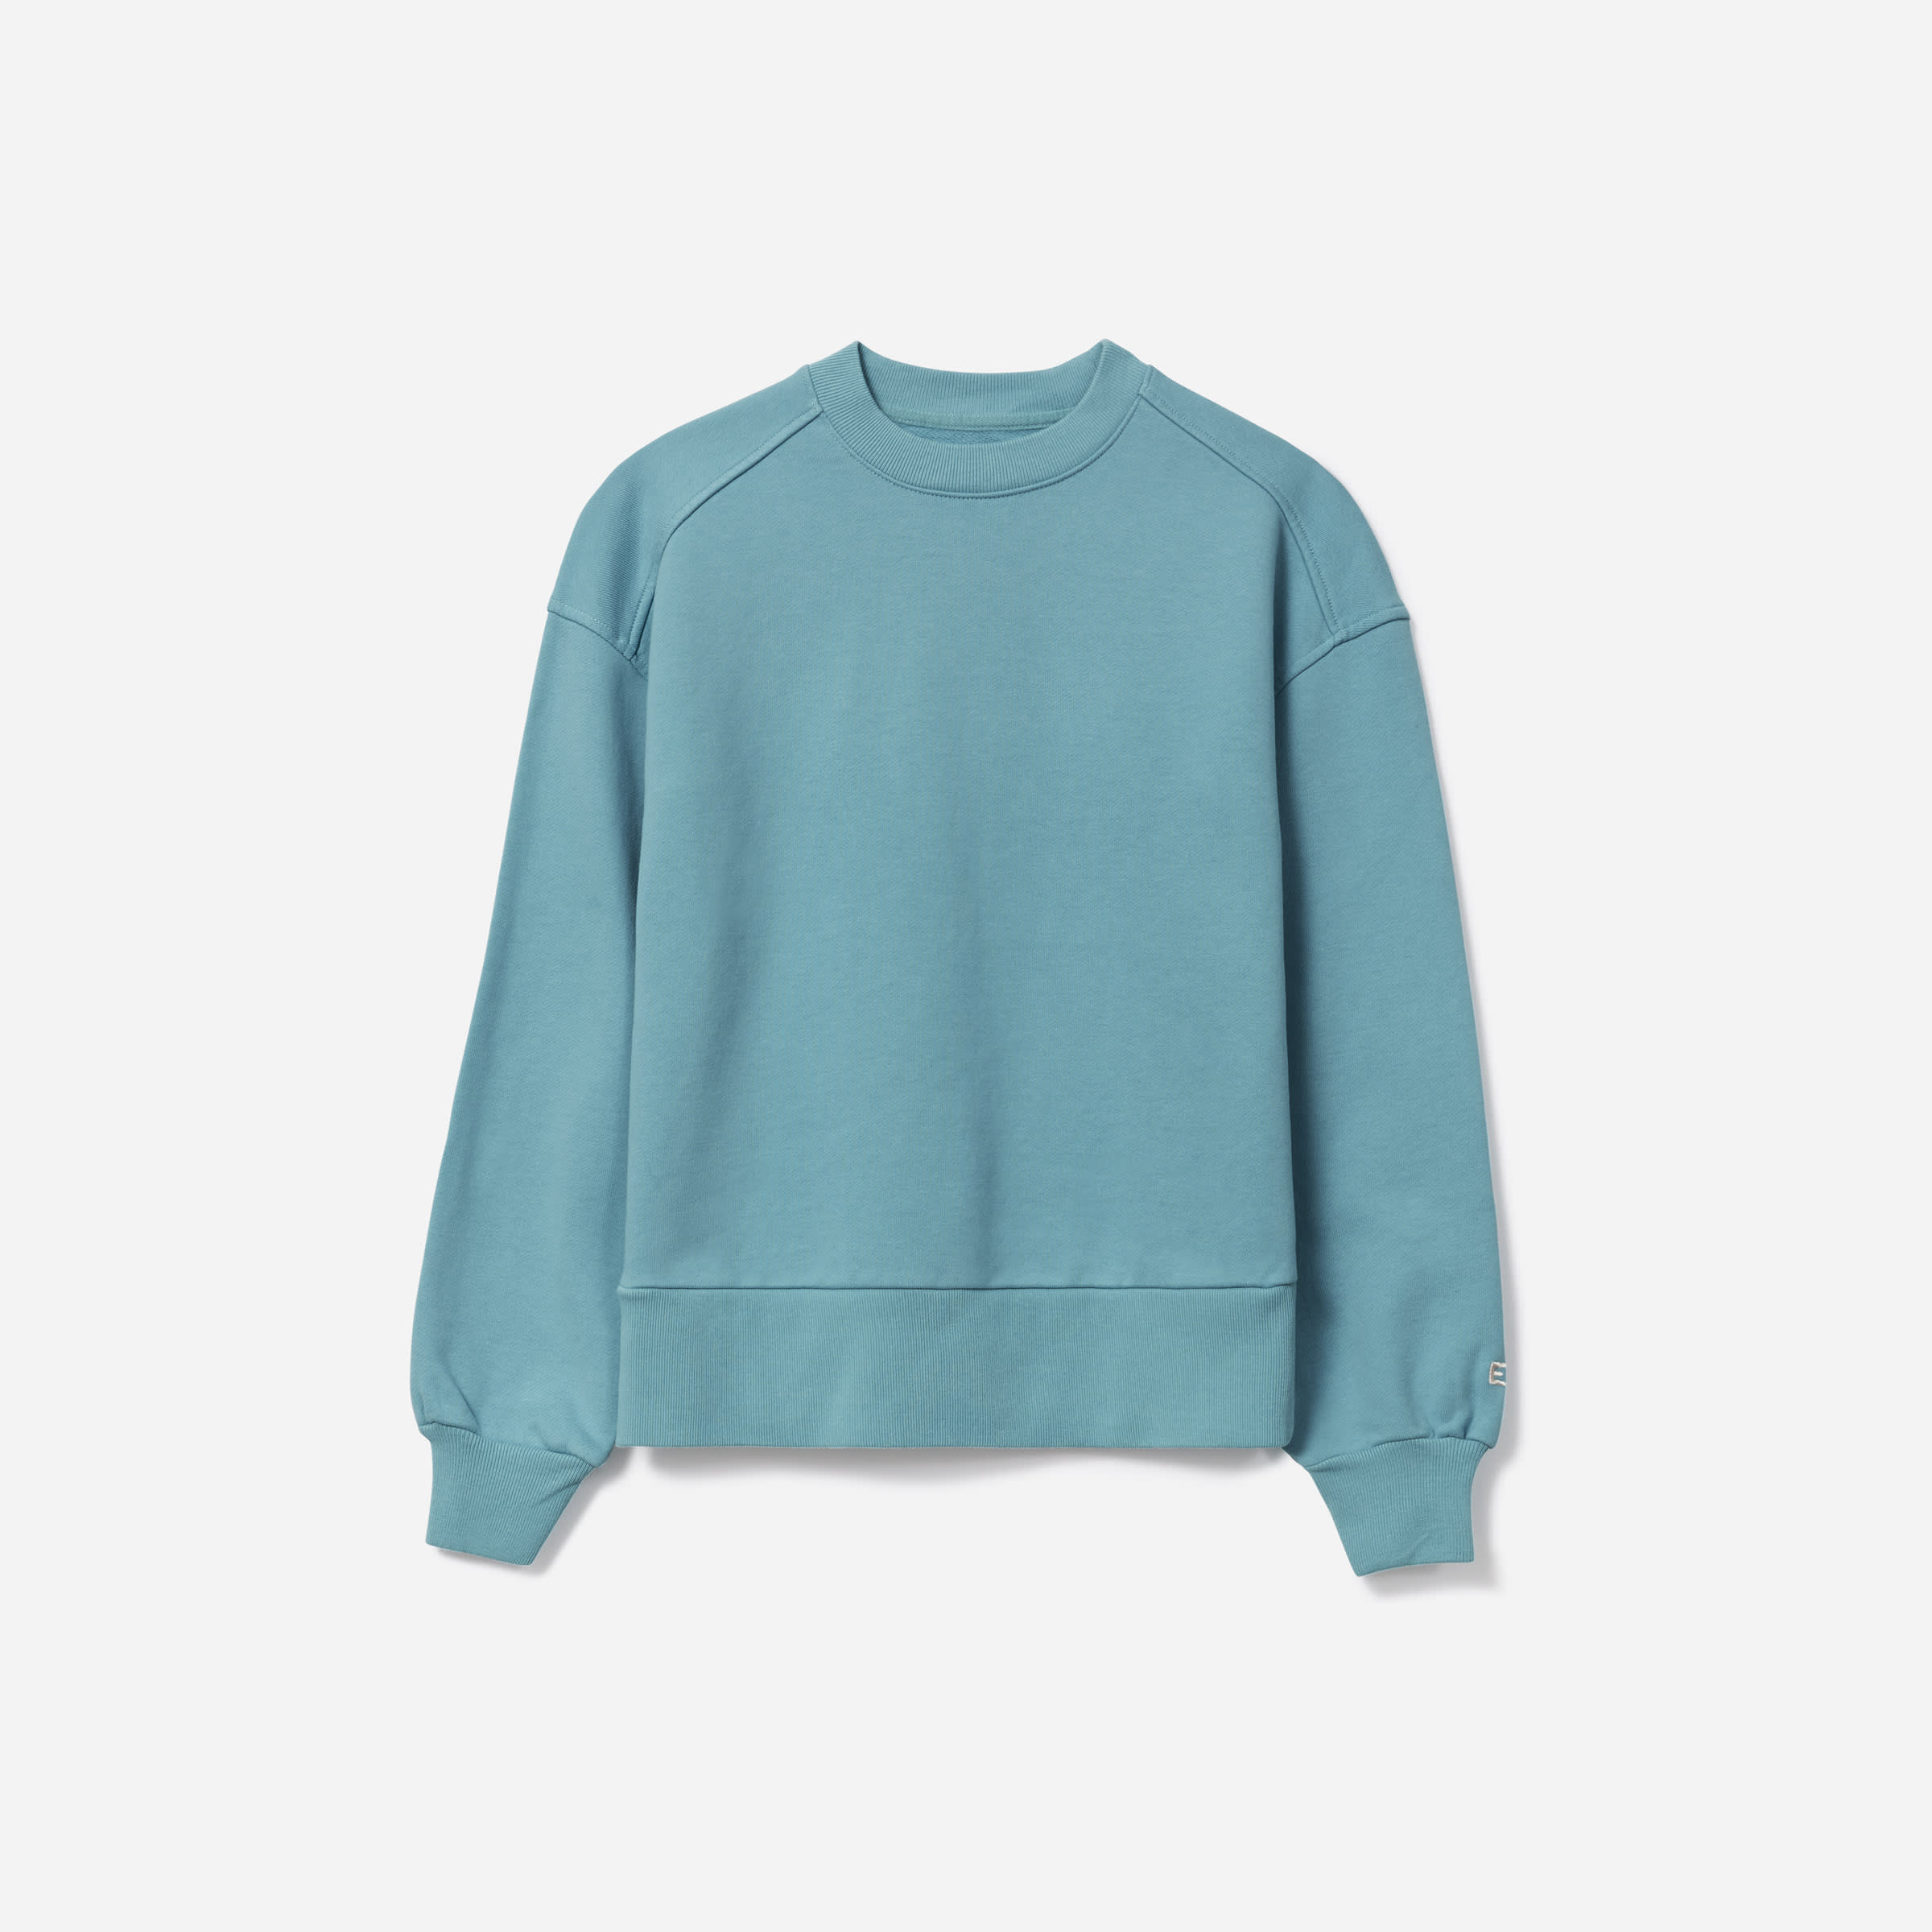 Mode Pullover Oversized Pullover Comma Woll Pullover Gr M top 